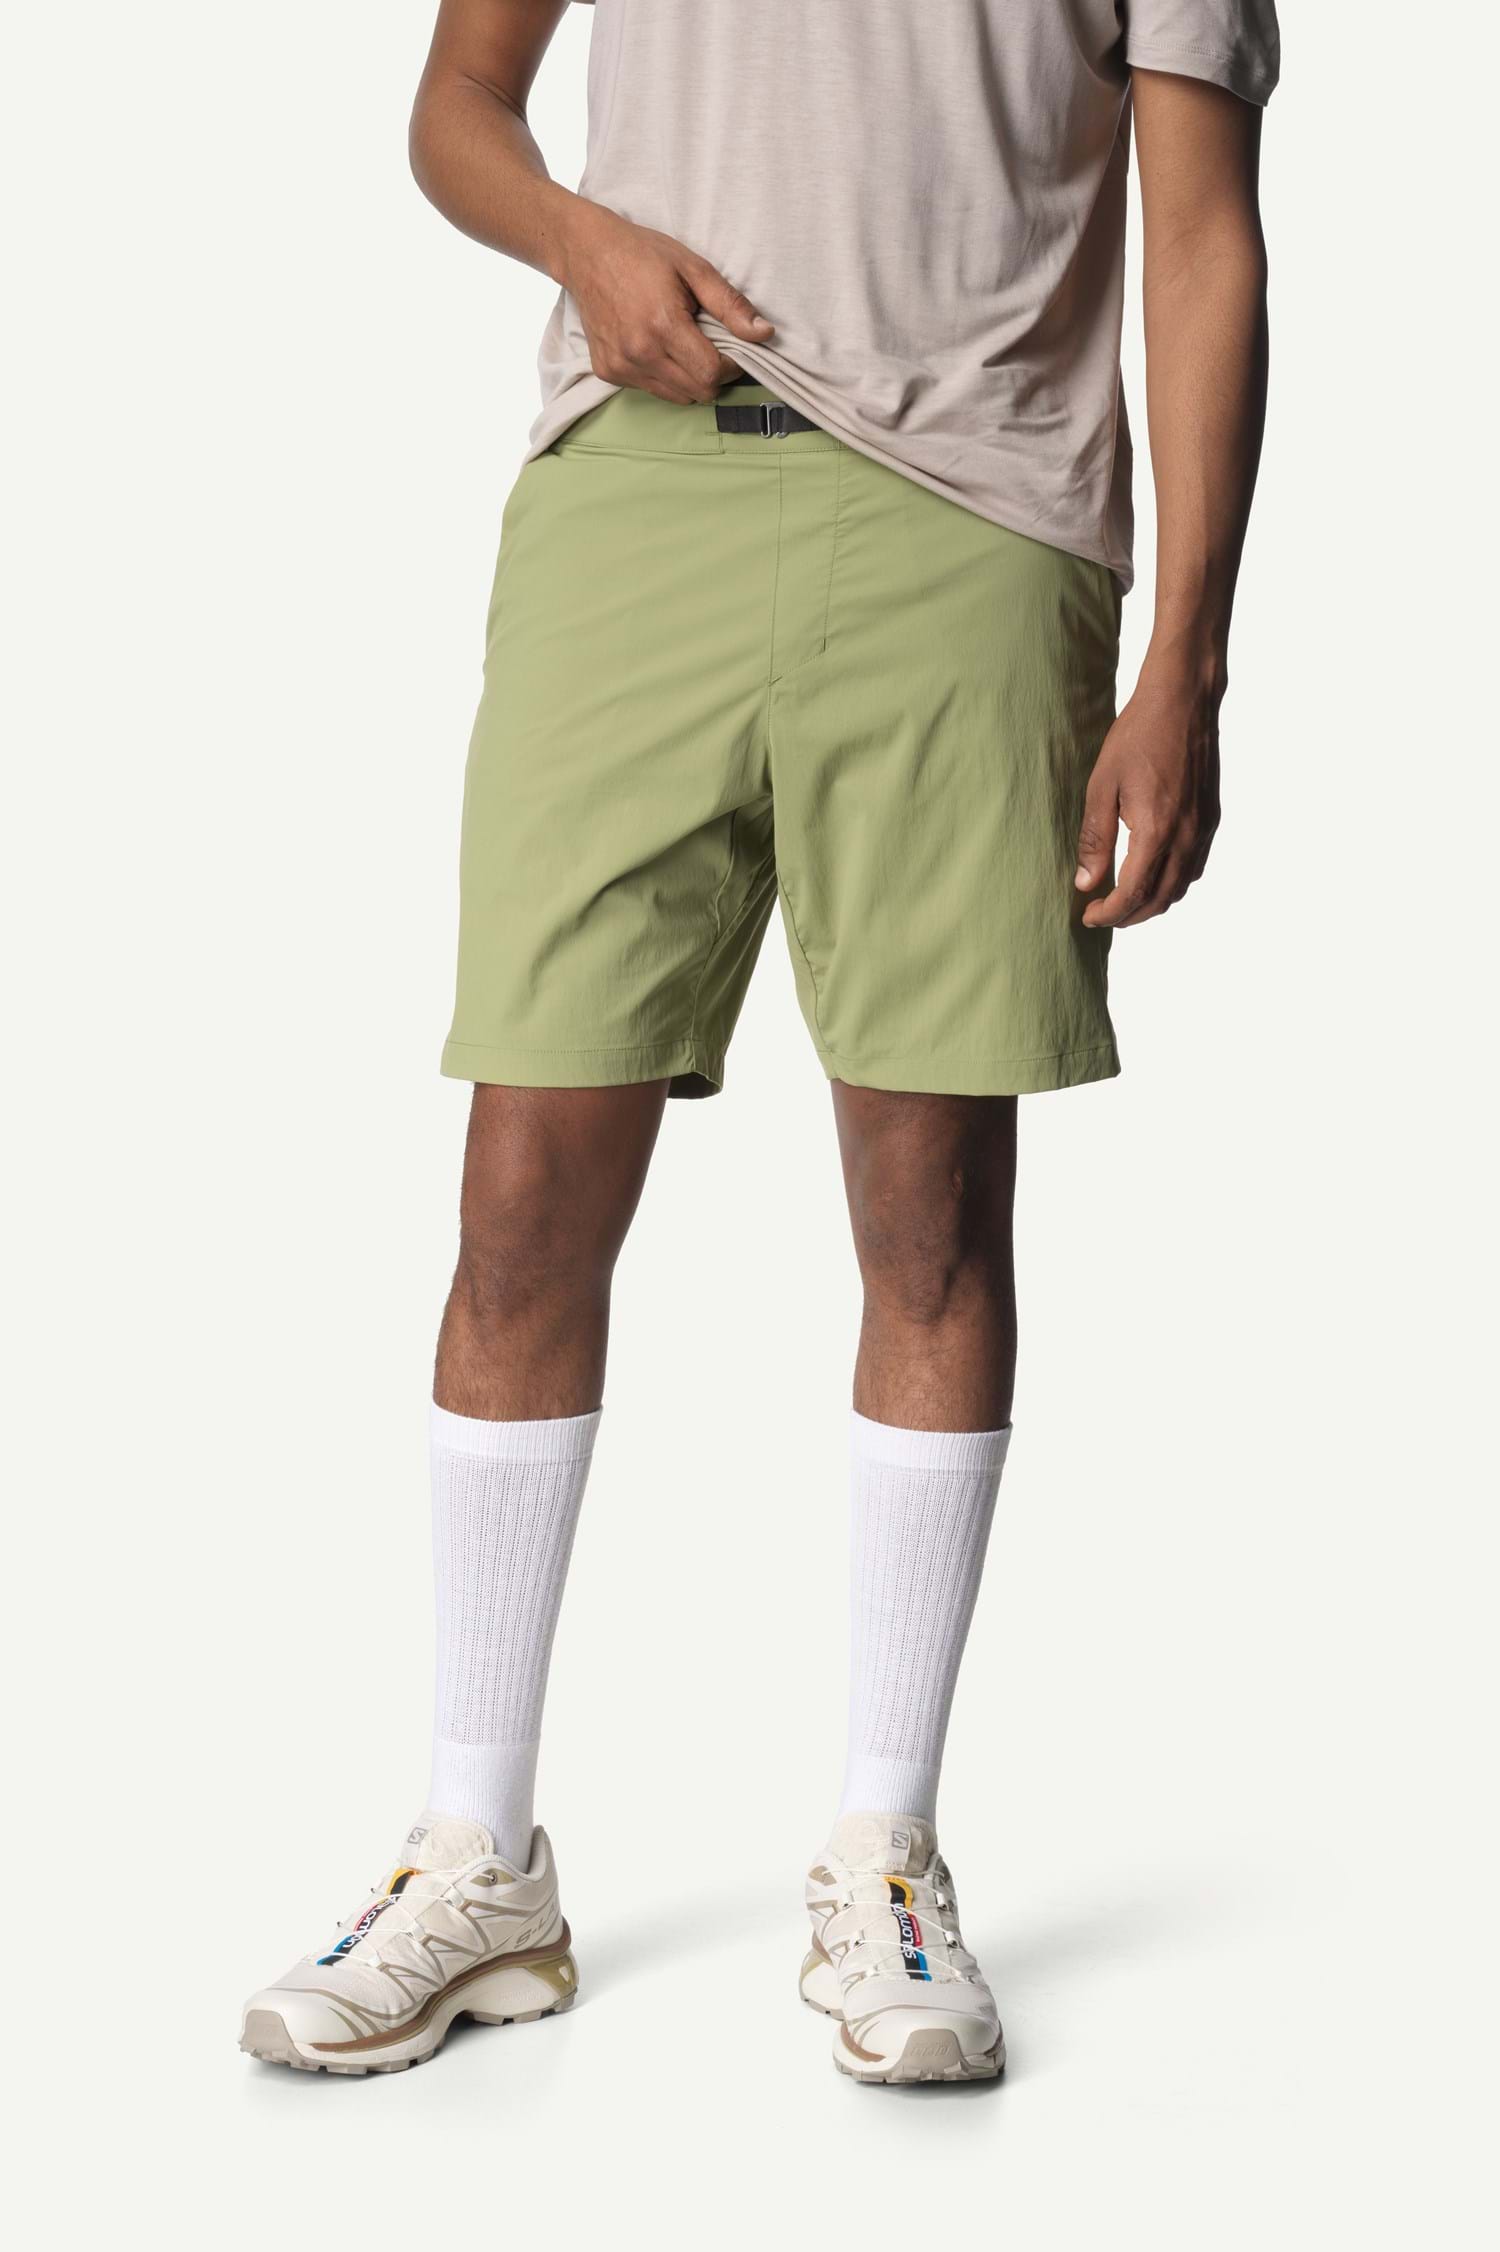 Houdini M's Wadi Shorts, Peas Out Green, S